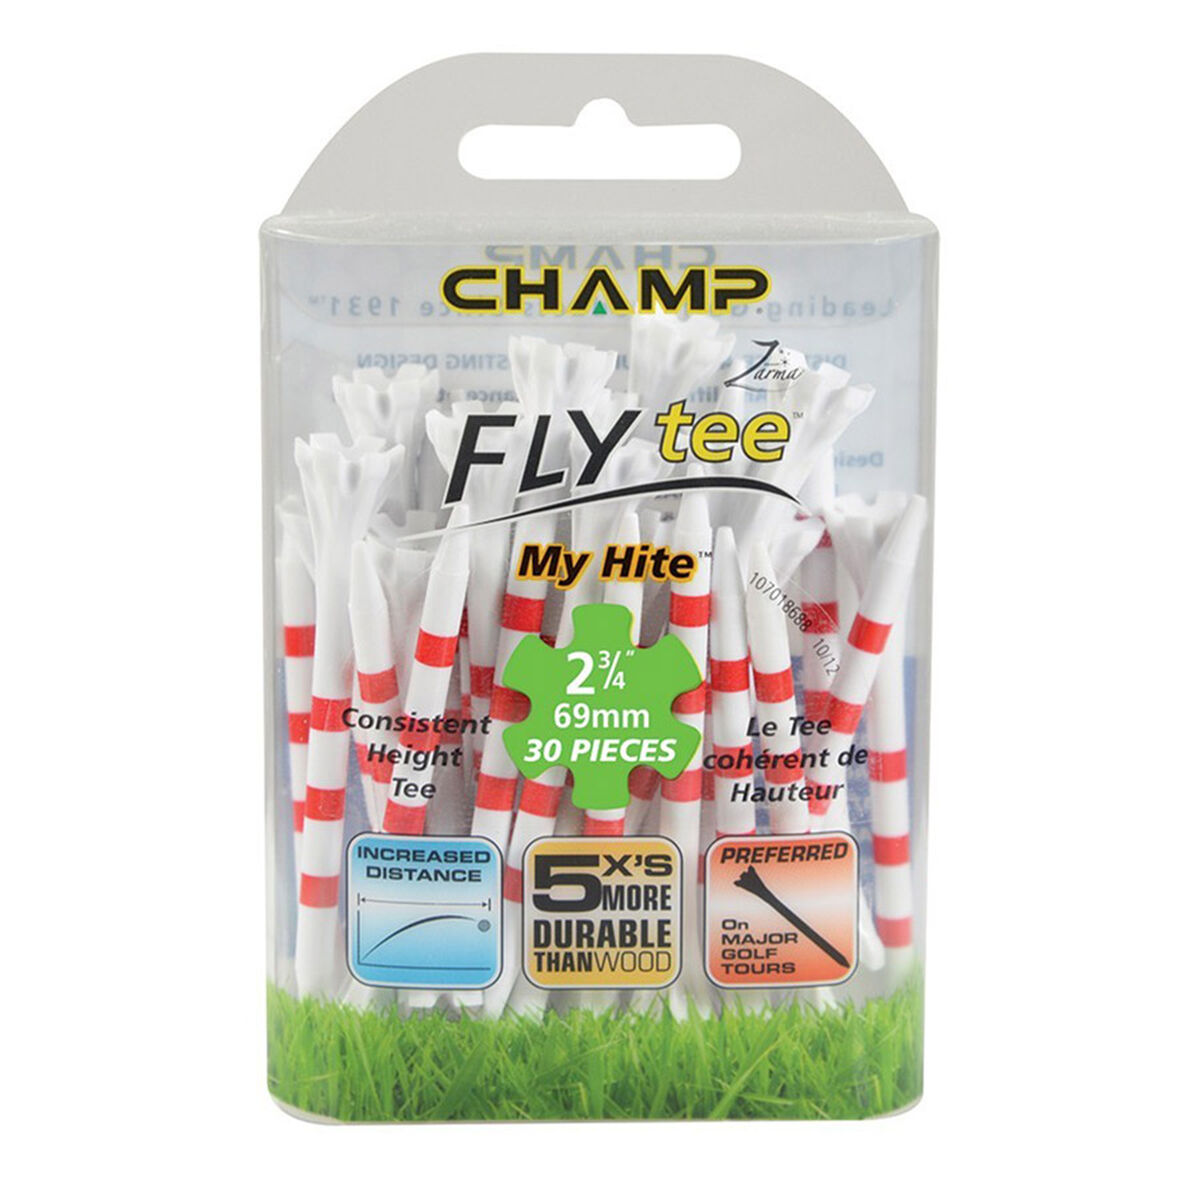 Champ White and Red MyHite Fly Pack of 30 Golf Tees, Size: 69mm | American Golf